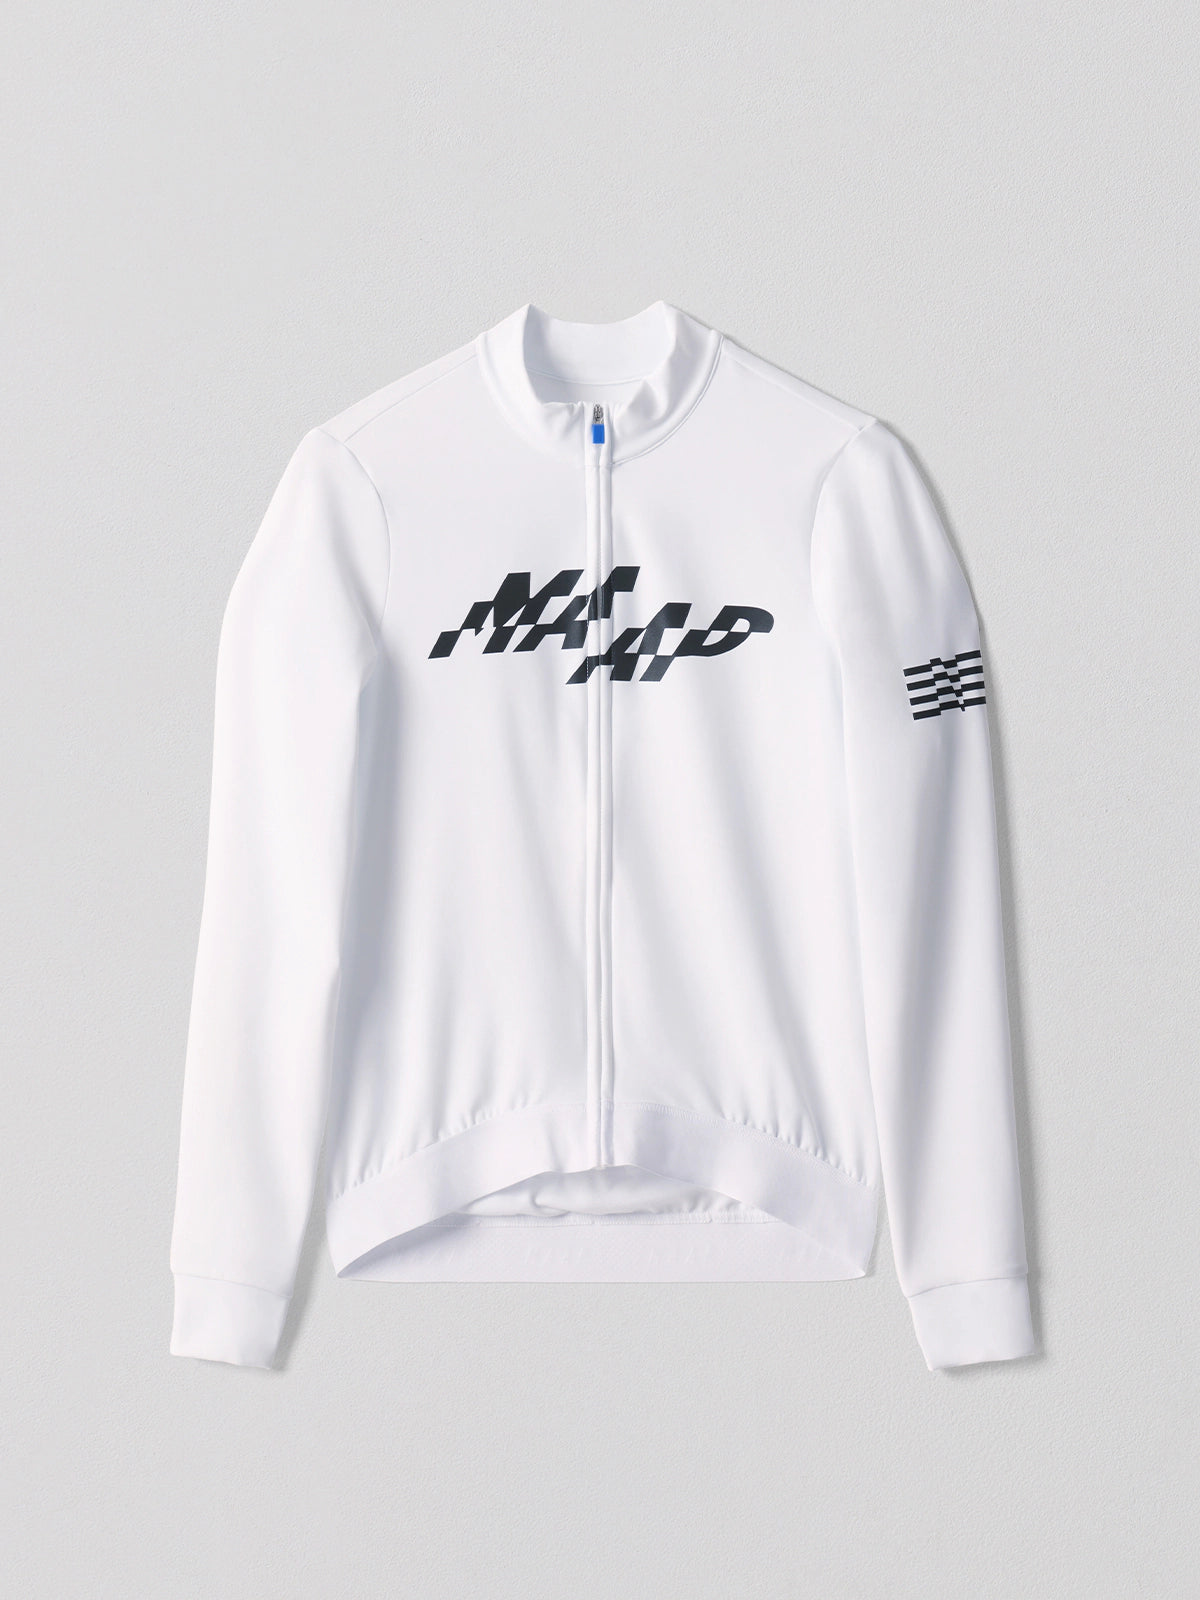 MAAP Women's Fragment Thermal LS Jersey 2.0 White レディース長袖サイクルジャージ | CYCLISM